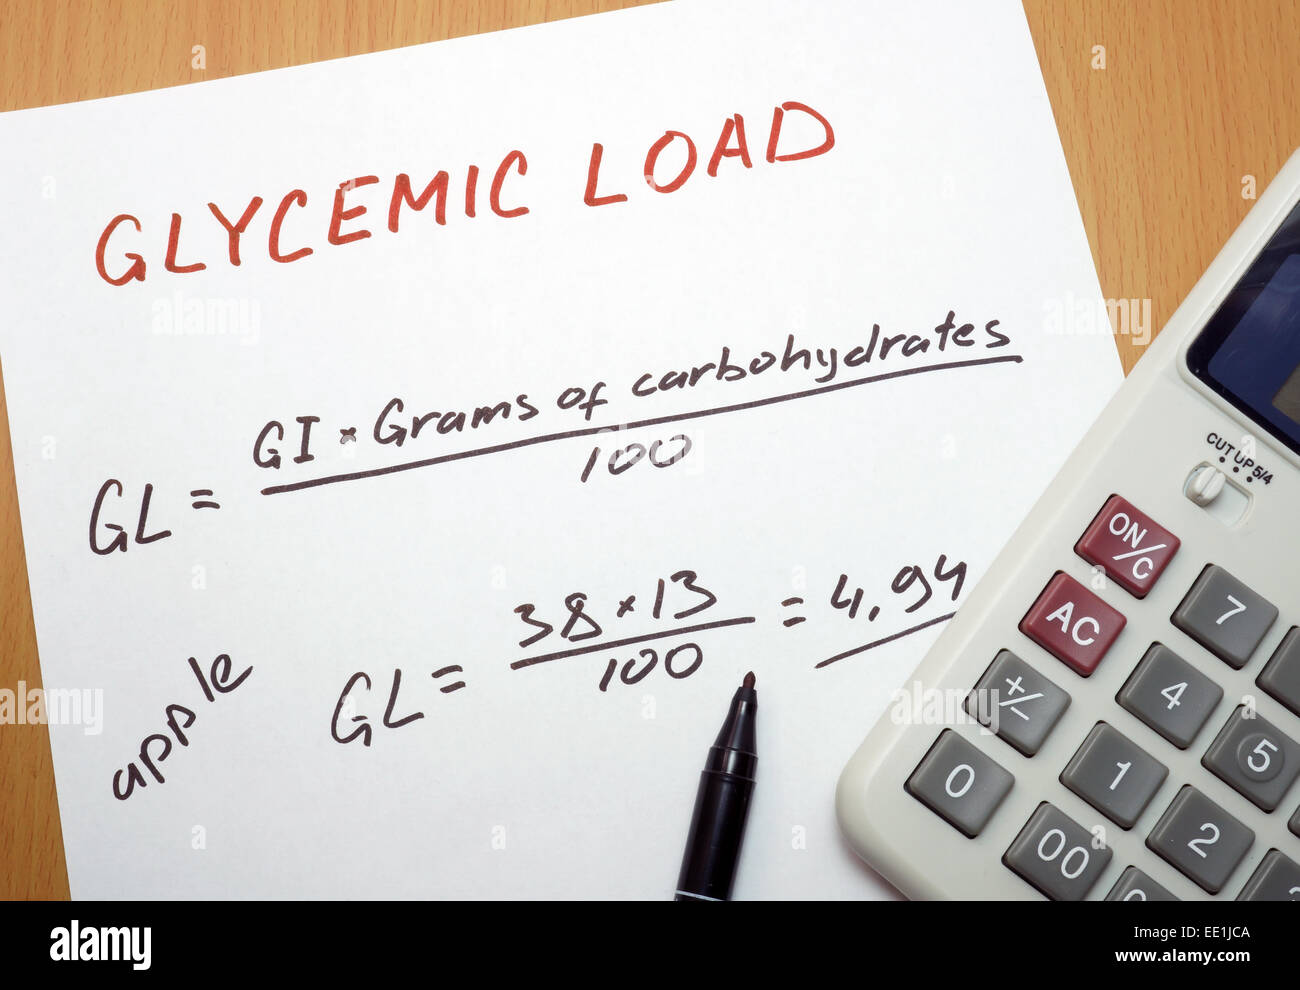 calculator, a marker and a paper with a glycemic load formula Stock Photo